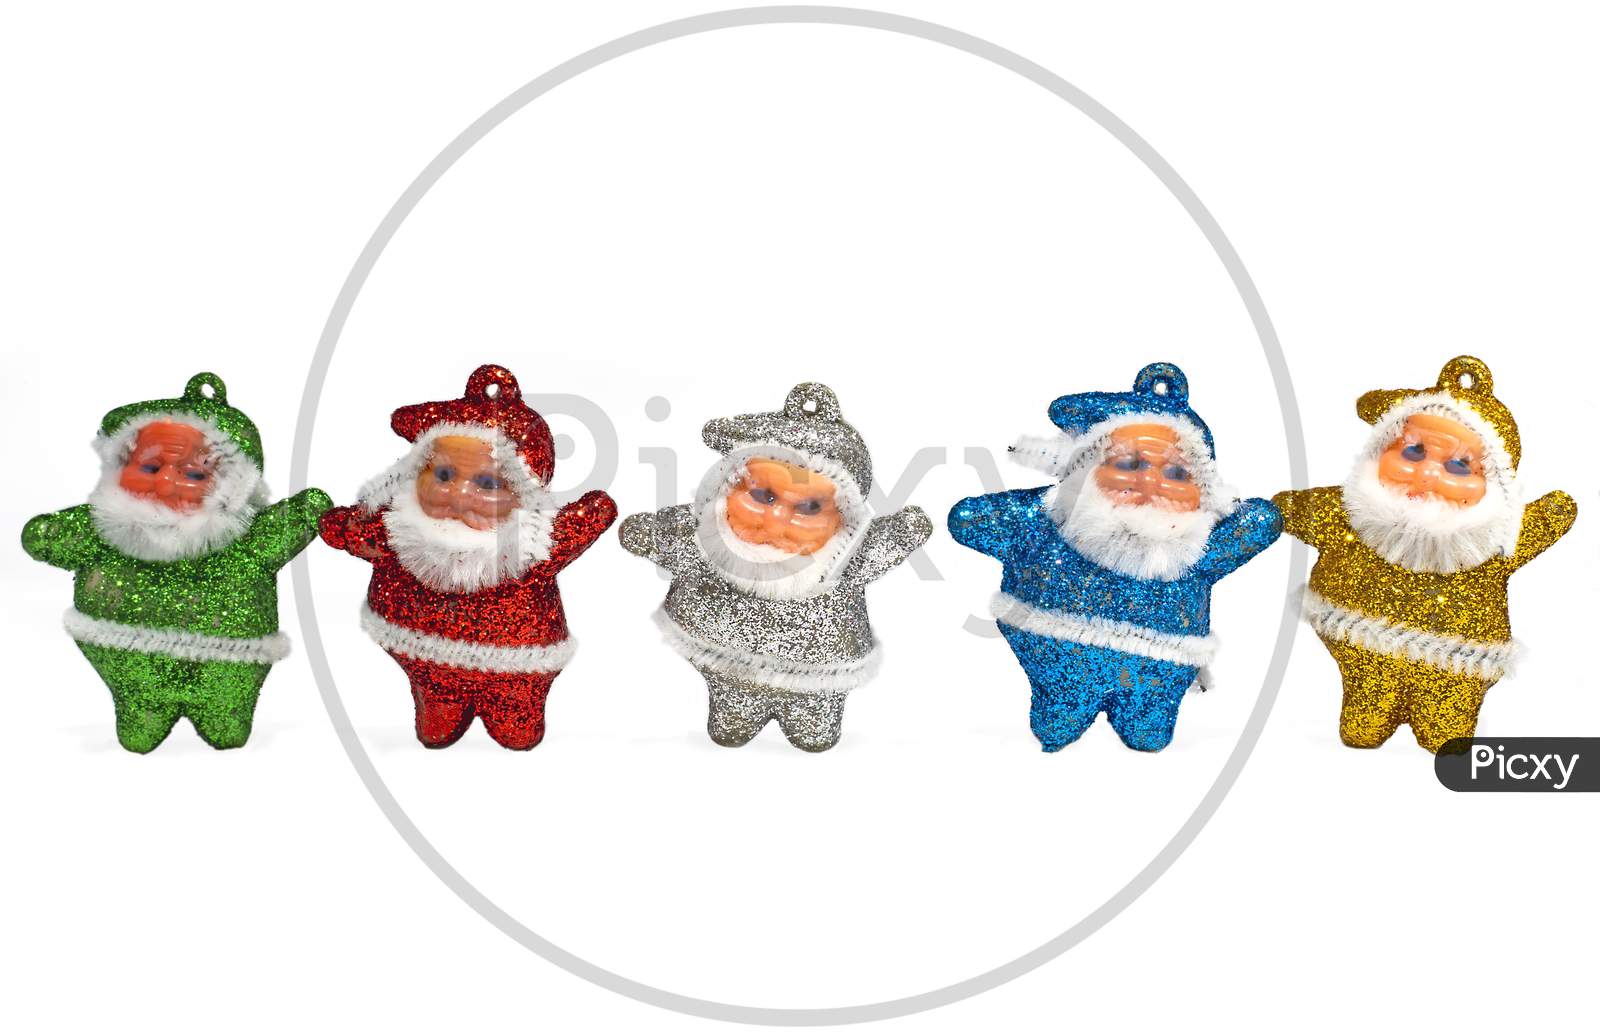 Multi-Colored Santa Claus Decorations On White Background. Copy Space